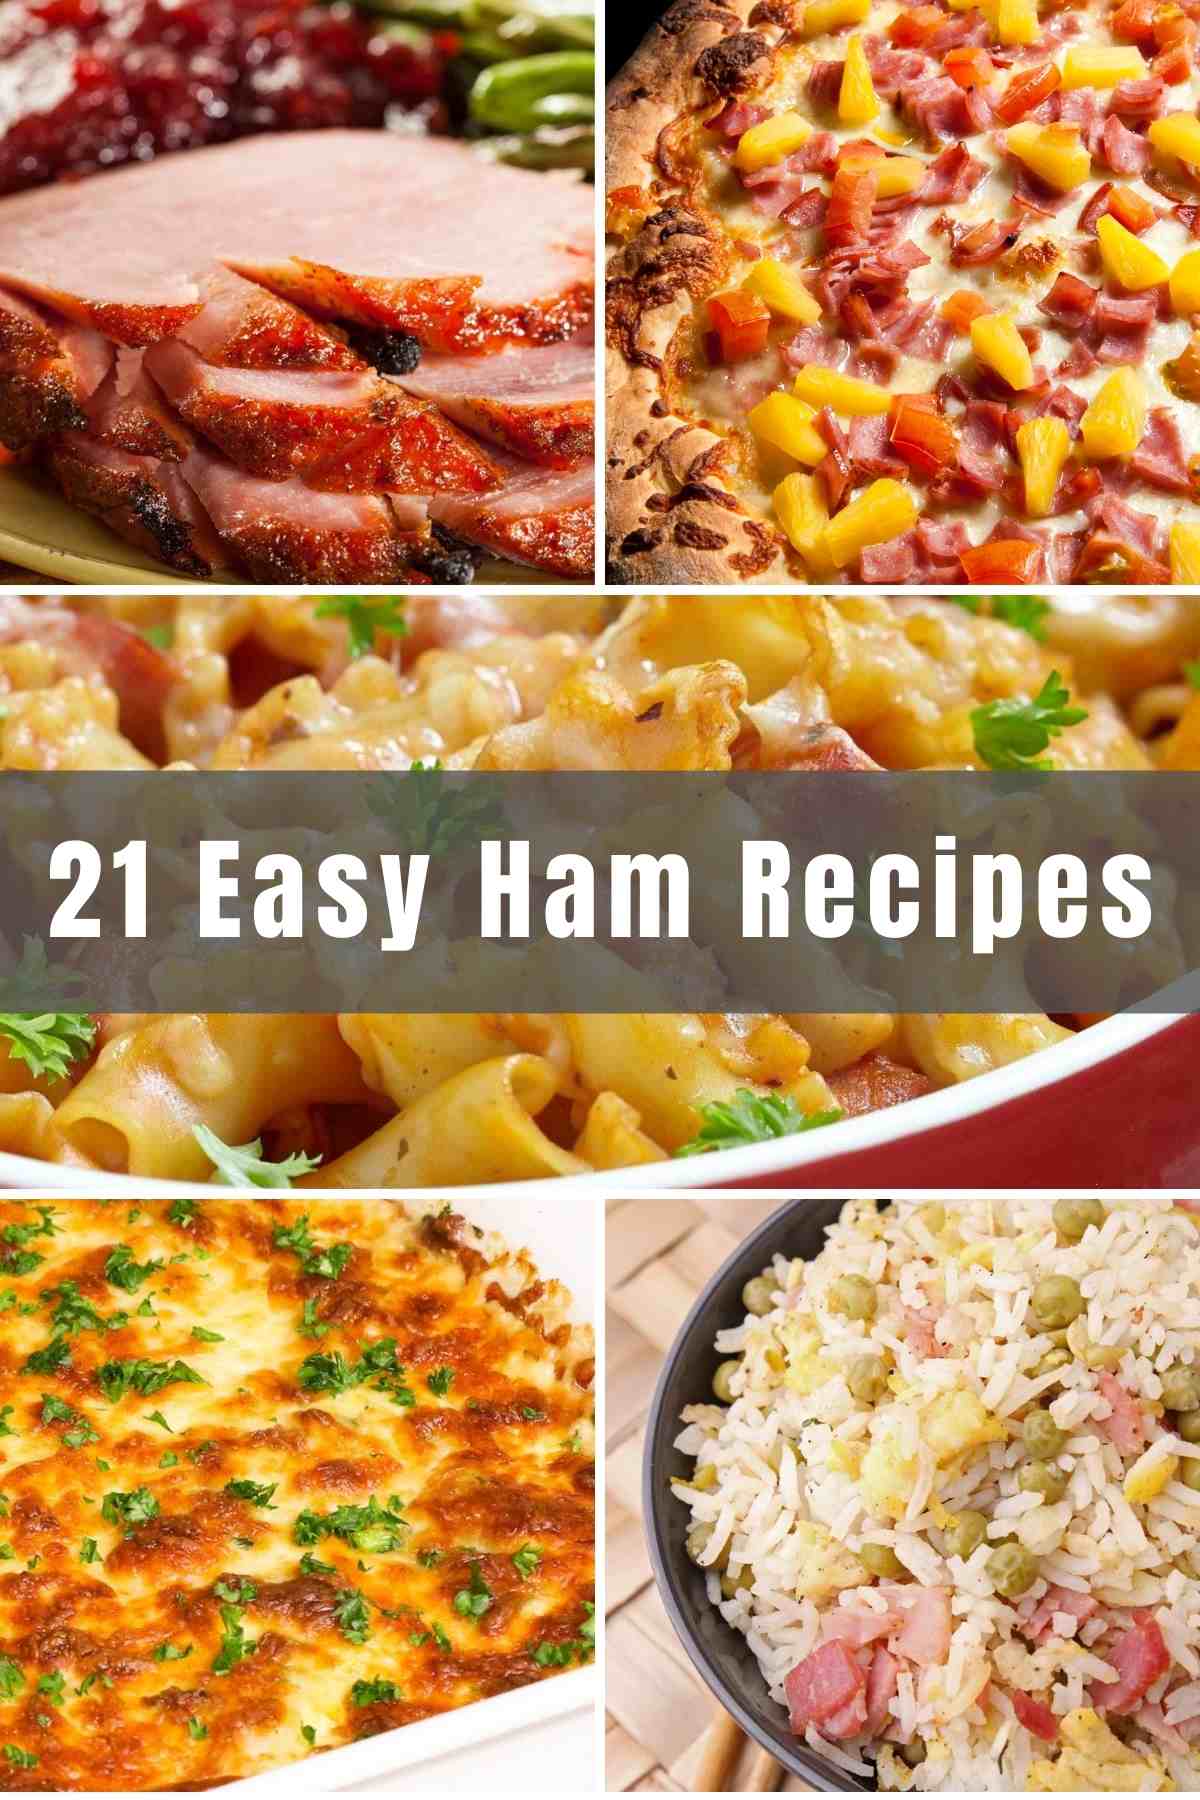 Wondering what to do with pre-cooked or leftover ham? These 19 Easy Ham Recipes will transform this versatile meat into something tasty and new! Depending on your preferences and prep time, you can create anything from comforting ham casserole to ham fried rice to ham pot pie.